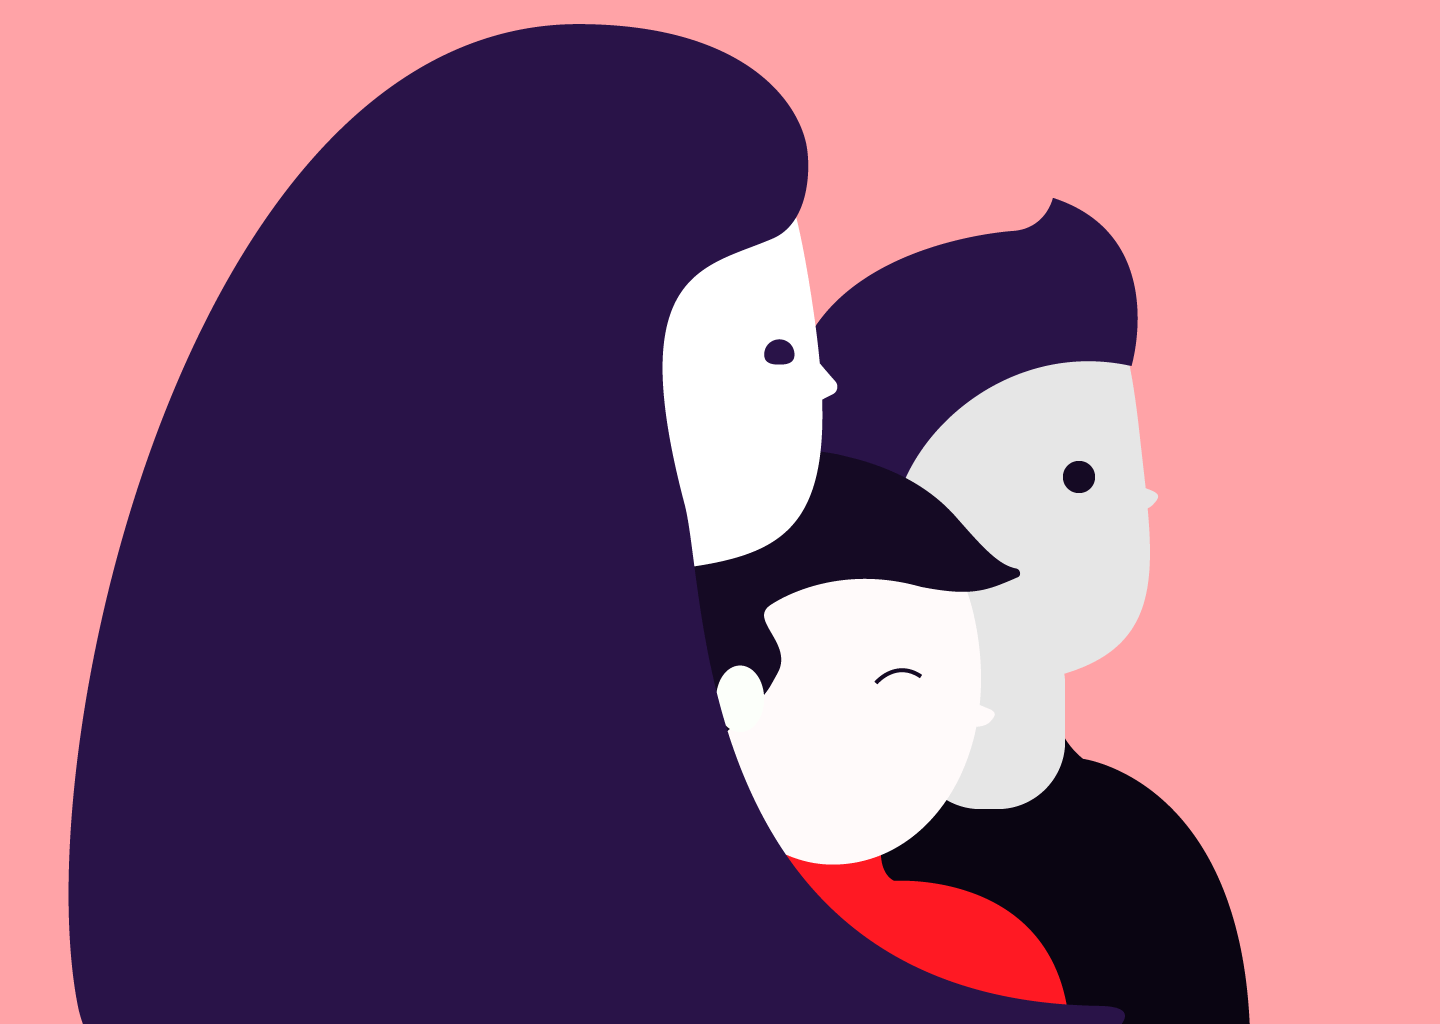 Stylised graphic design of family